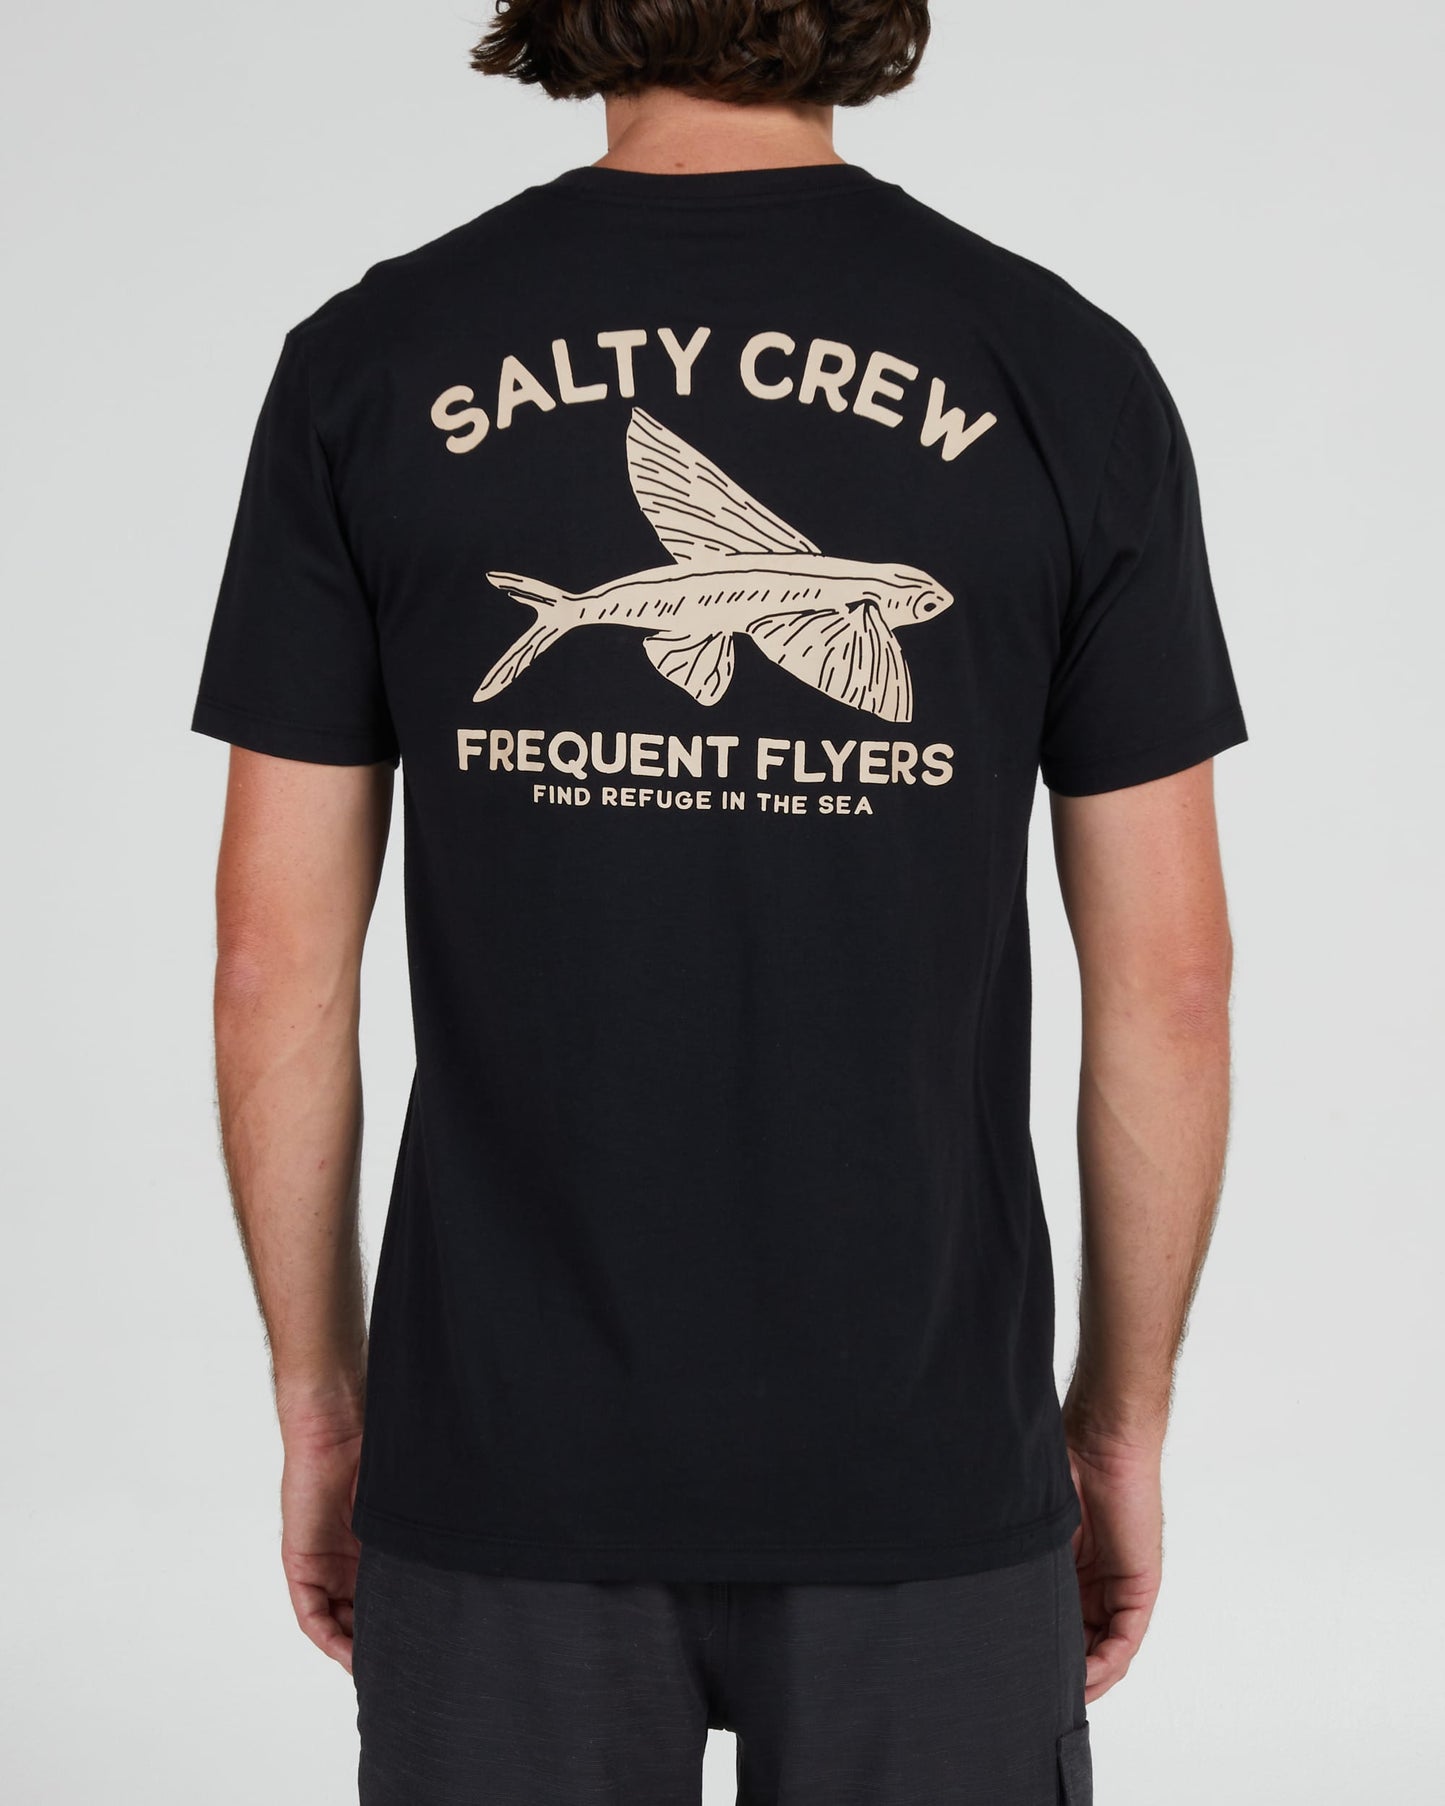 Salty crew T-SHIRTS S/S FREQUENT FLYER PREMIUM S/S TEE - Black in Black